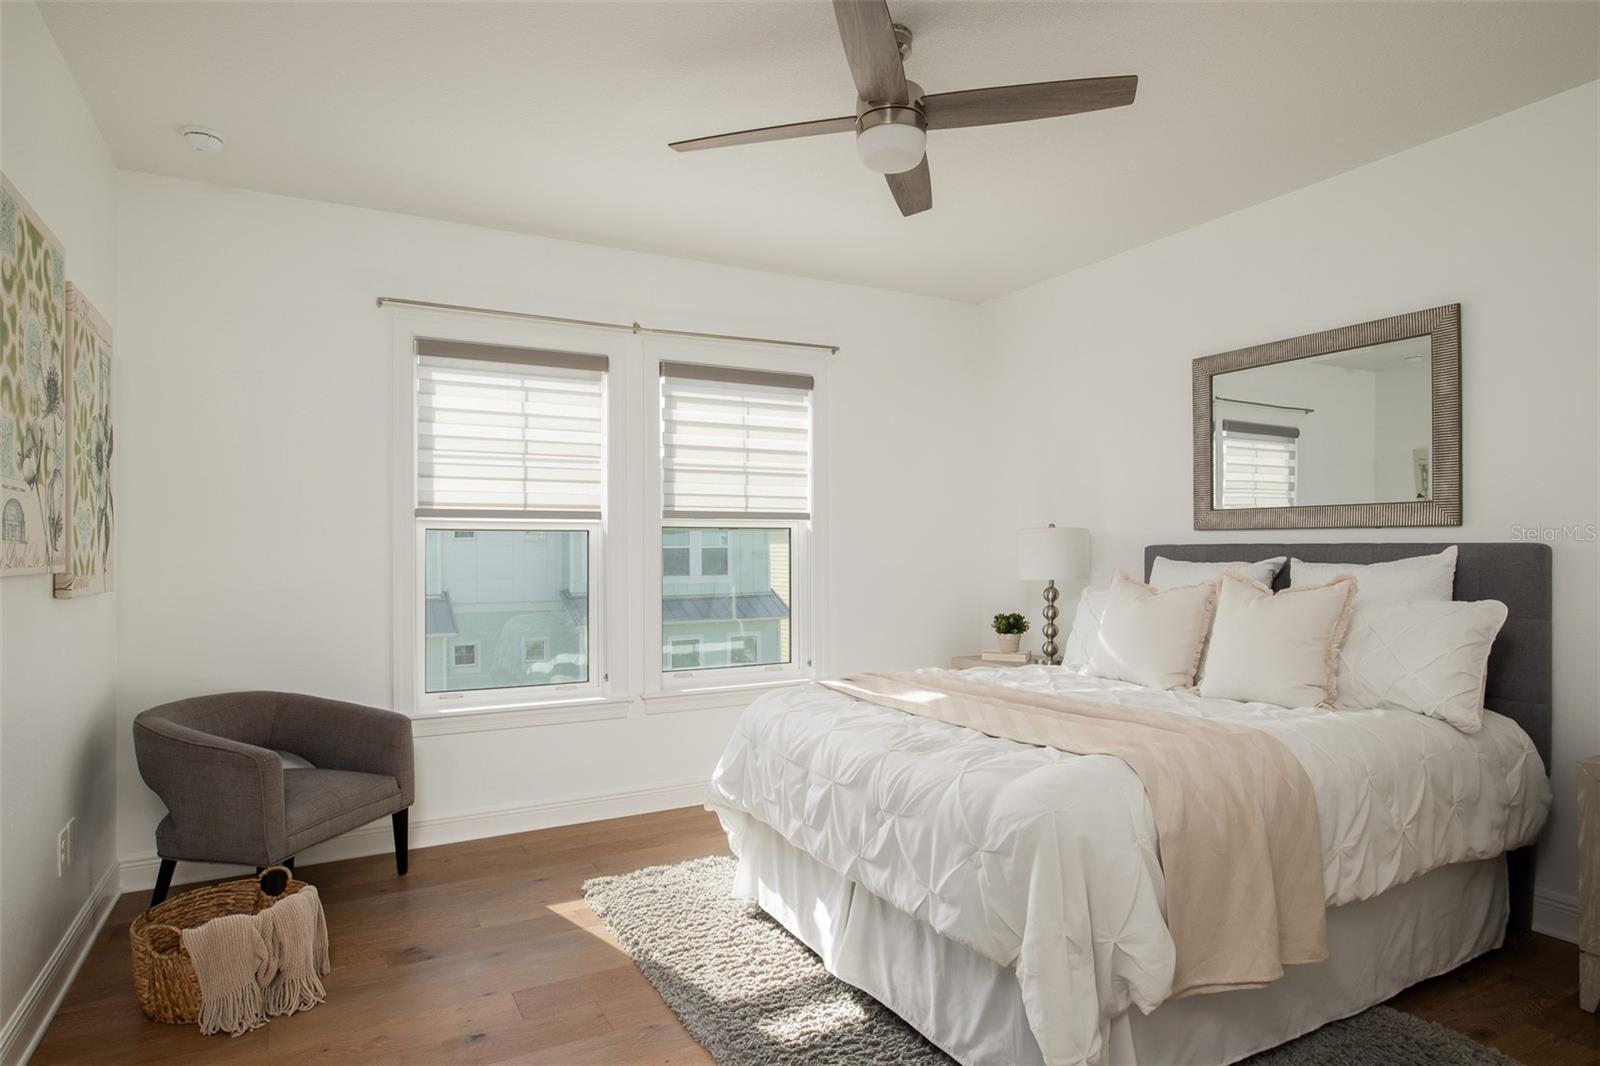 The second owners suite offers a tranquil escape, featuring a ceiling fan and abundant natural lighting, providing a serene haven within your coastal home for ultimate relaxation and comfort.